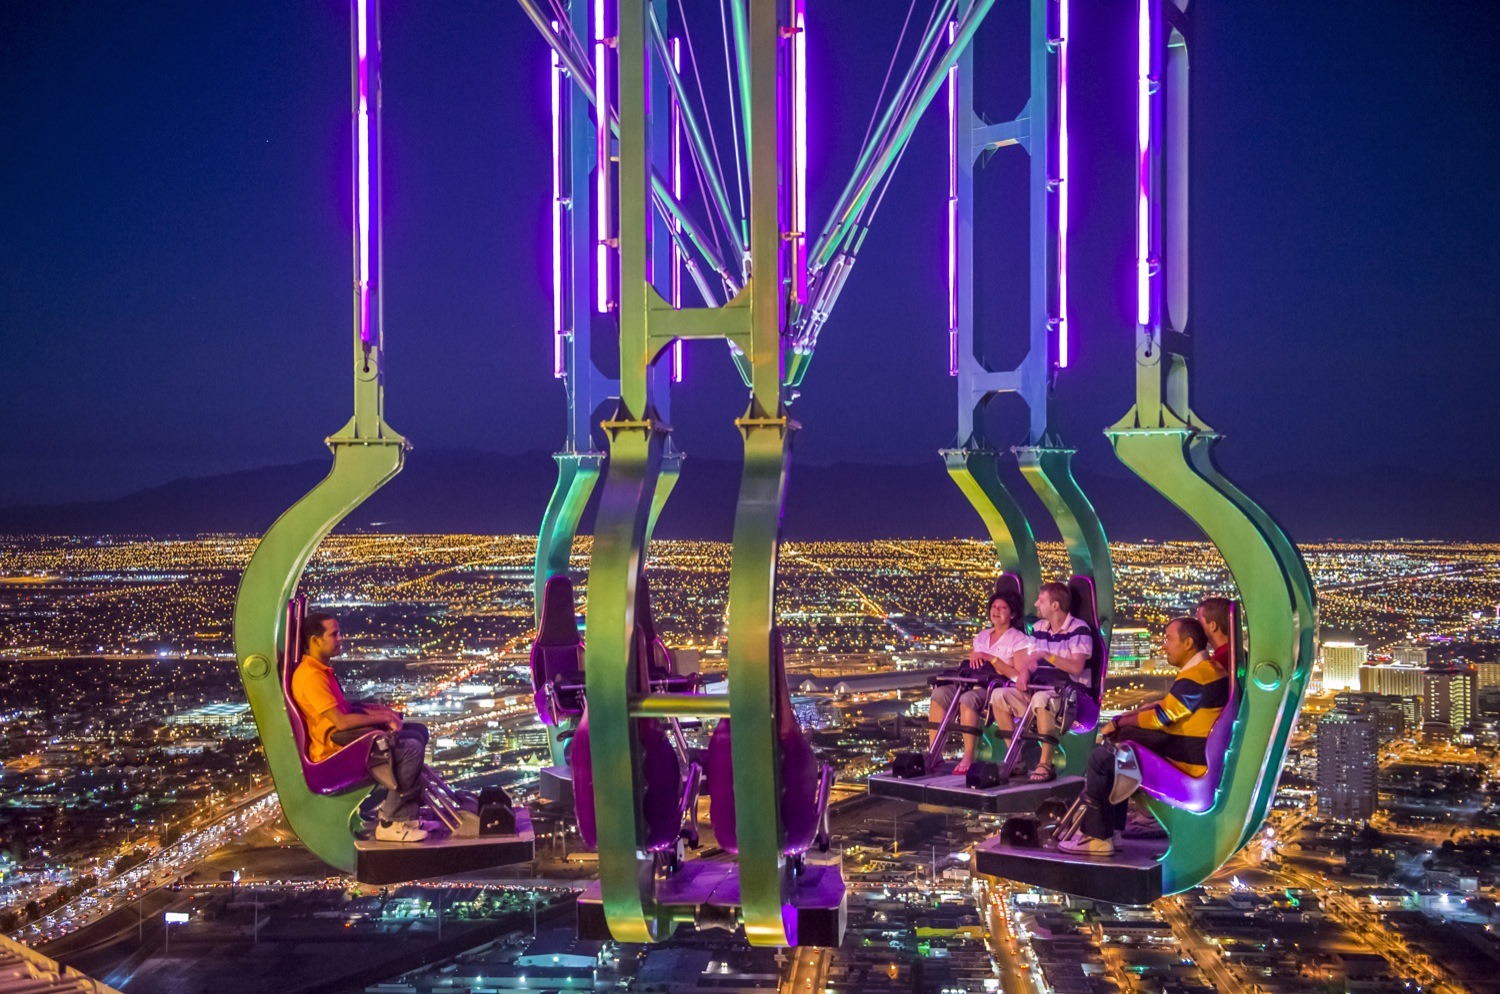 Things to do in Las Vegas—Attractions, restaurants and sights